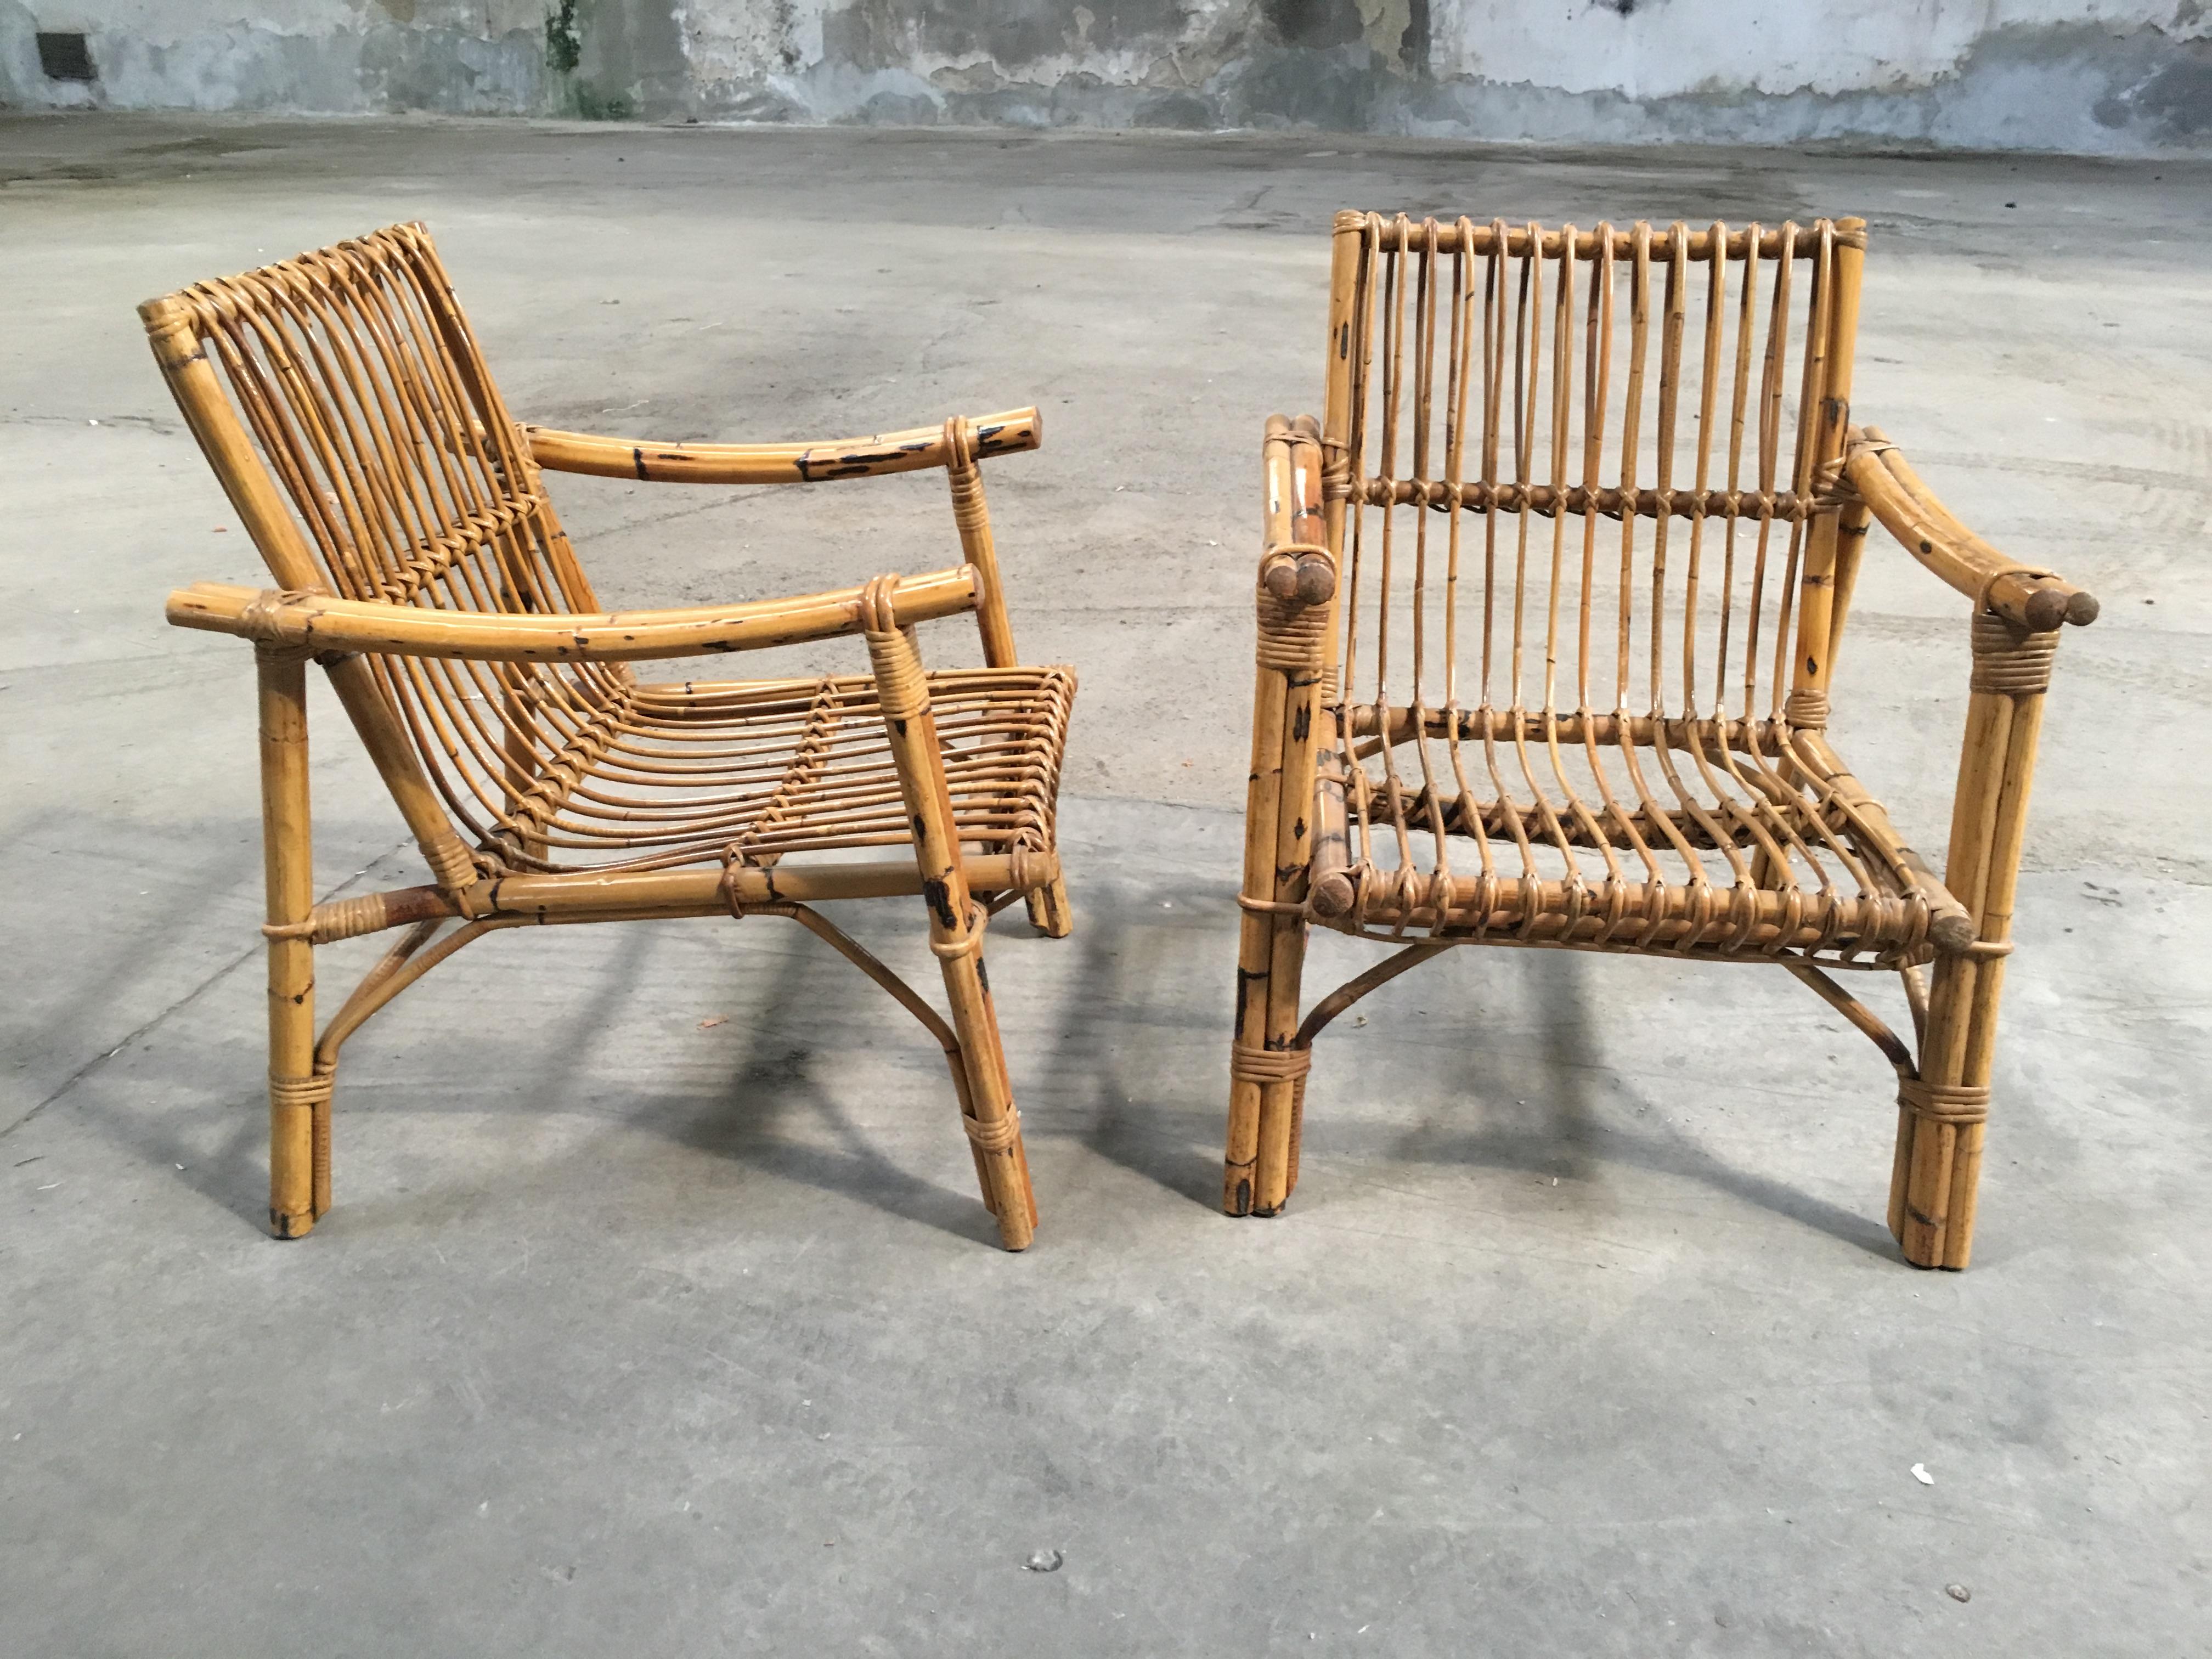 Pair of Italian organic modern bamboo armchairs with original floral cushions from 1960s
The armchairs are n the style of Franco Albini, Paul Frankl, McGuire and they are in really good vintage conditions.